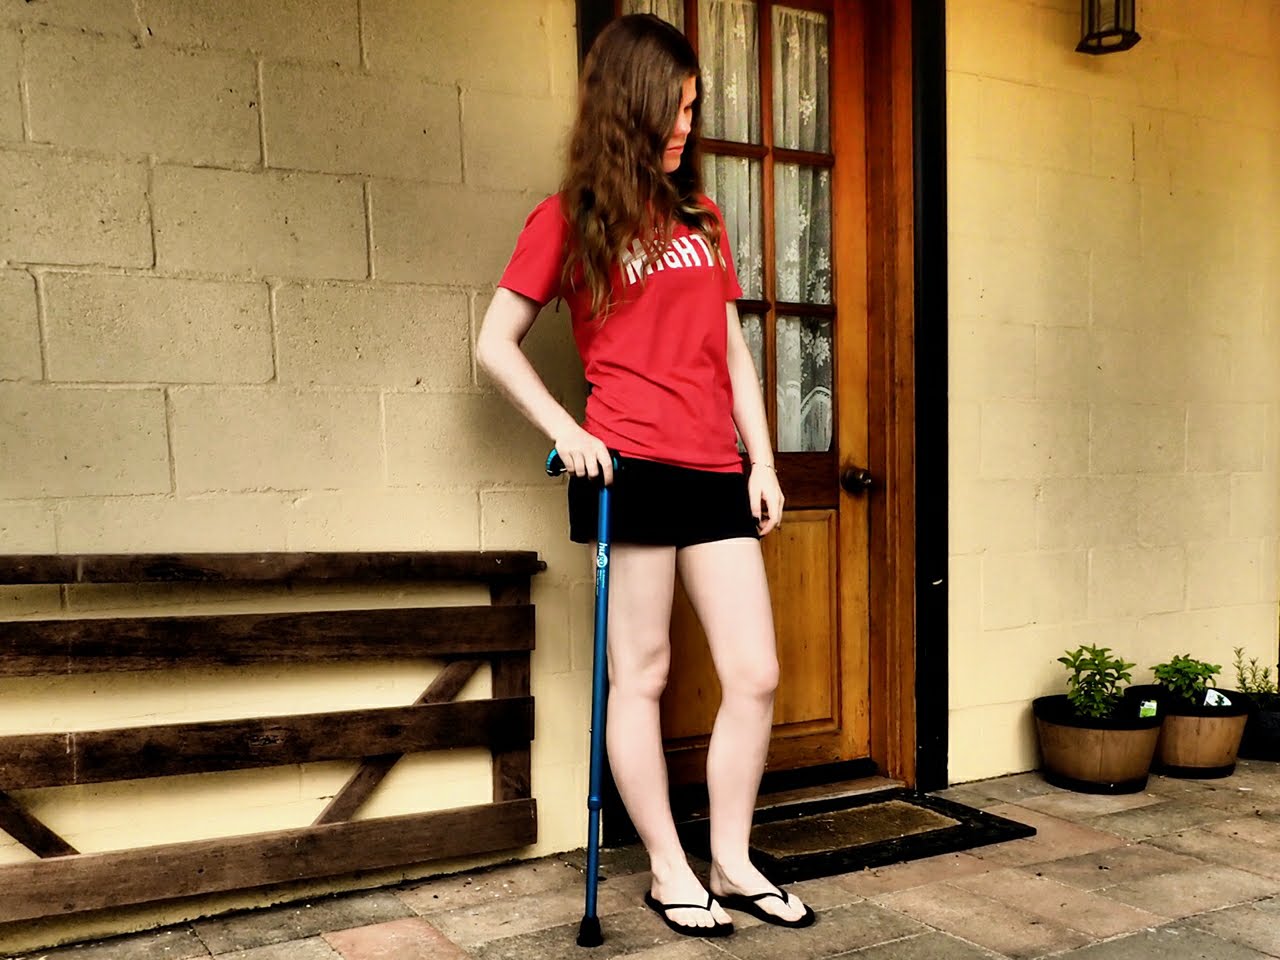 Jess standing with a cane, wearing her Mighty t-shirt.